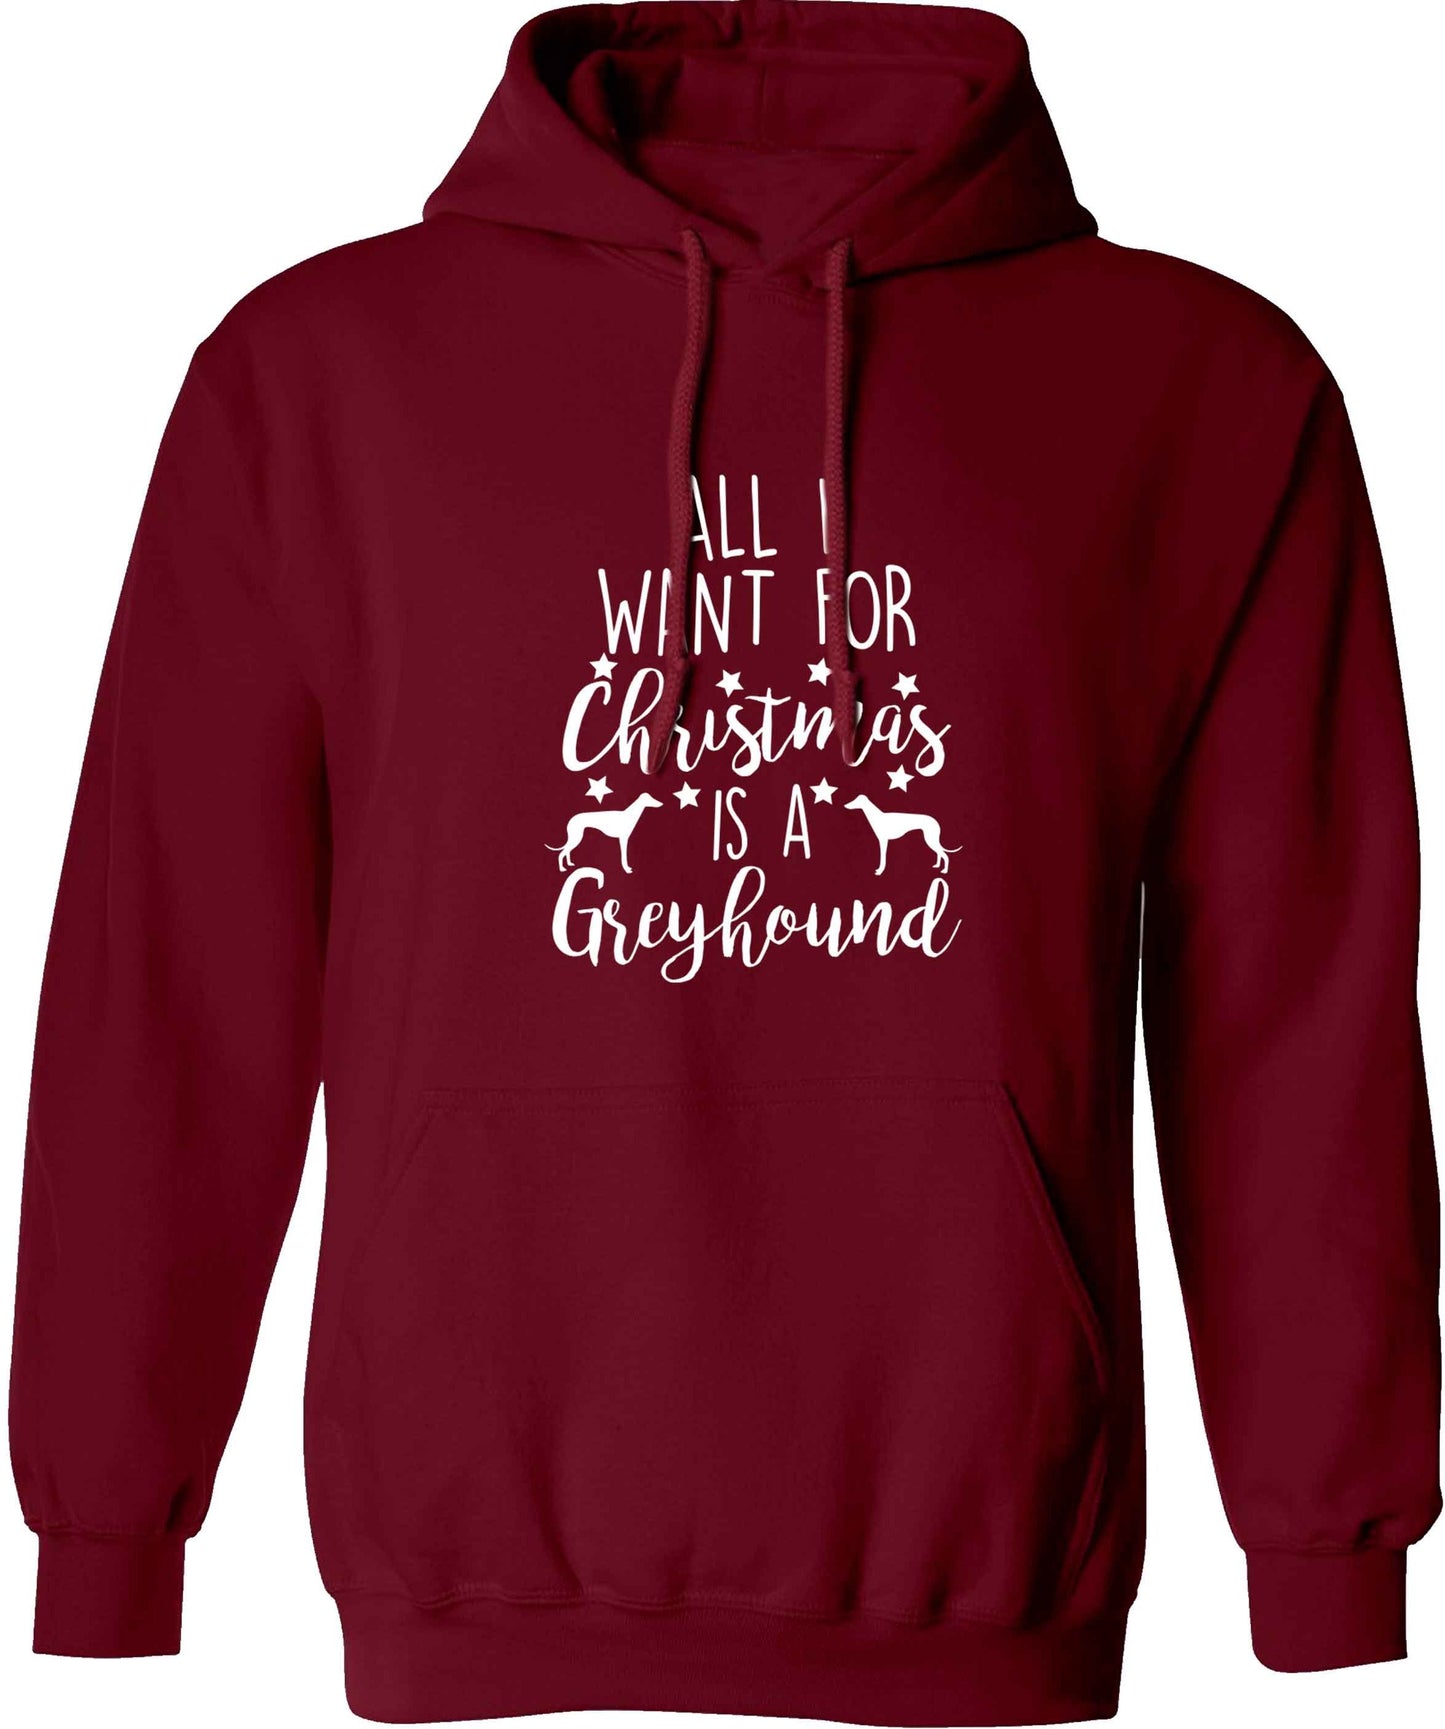 All I want for Christmas is a greyhound adults unisex maroon hoodie 2XL